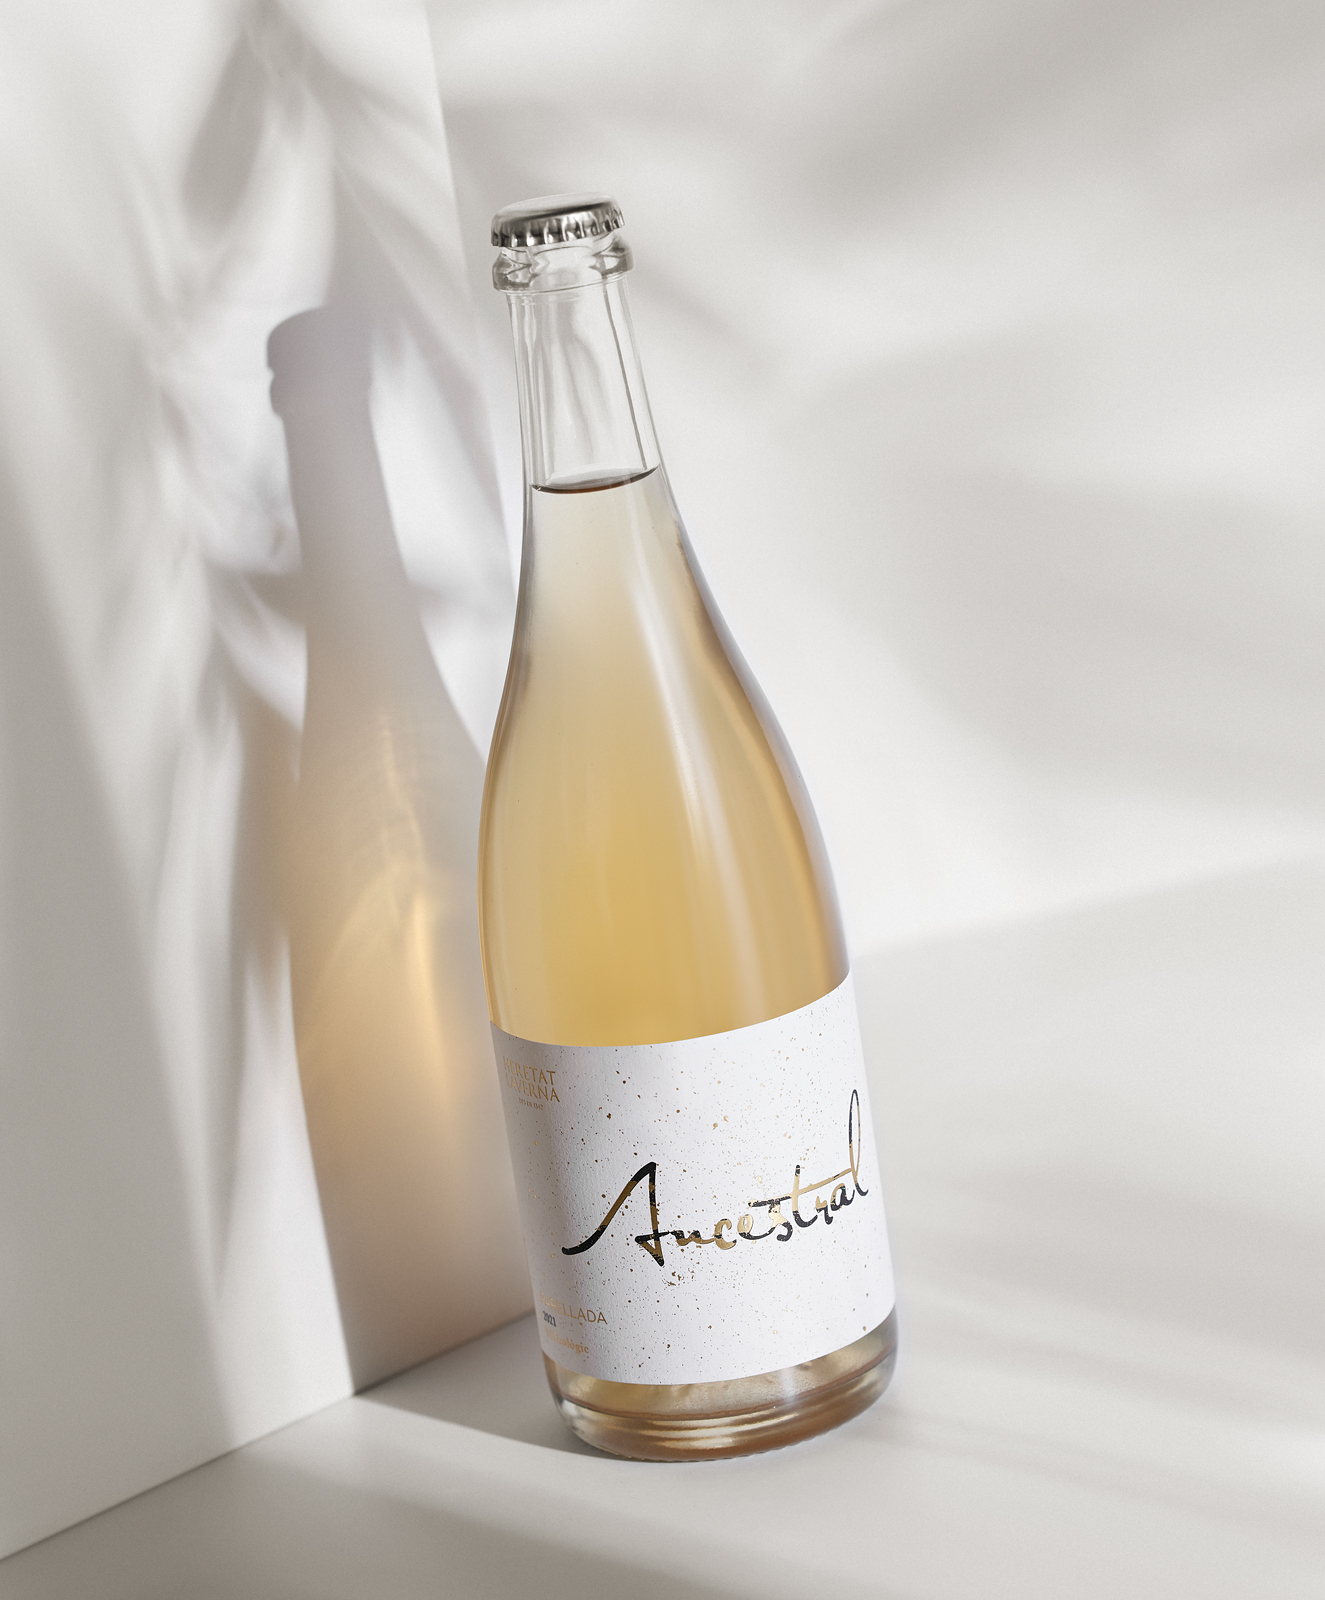 Ancestral a Part of a Series of Wines for Heretat Laverna, Designed by Bulldog Studio